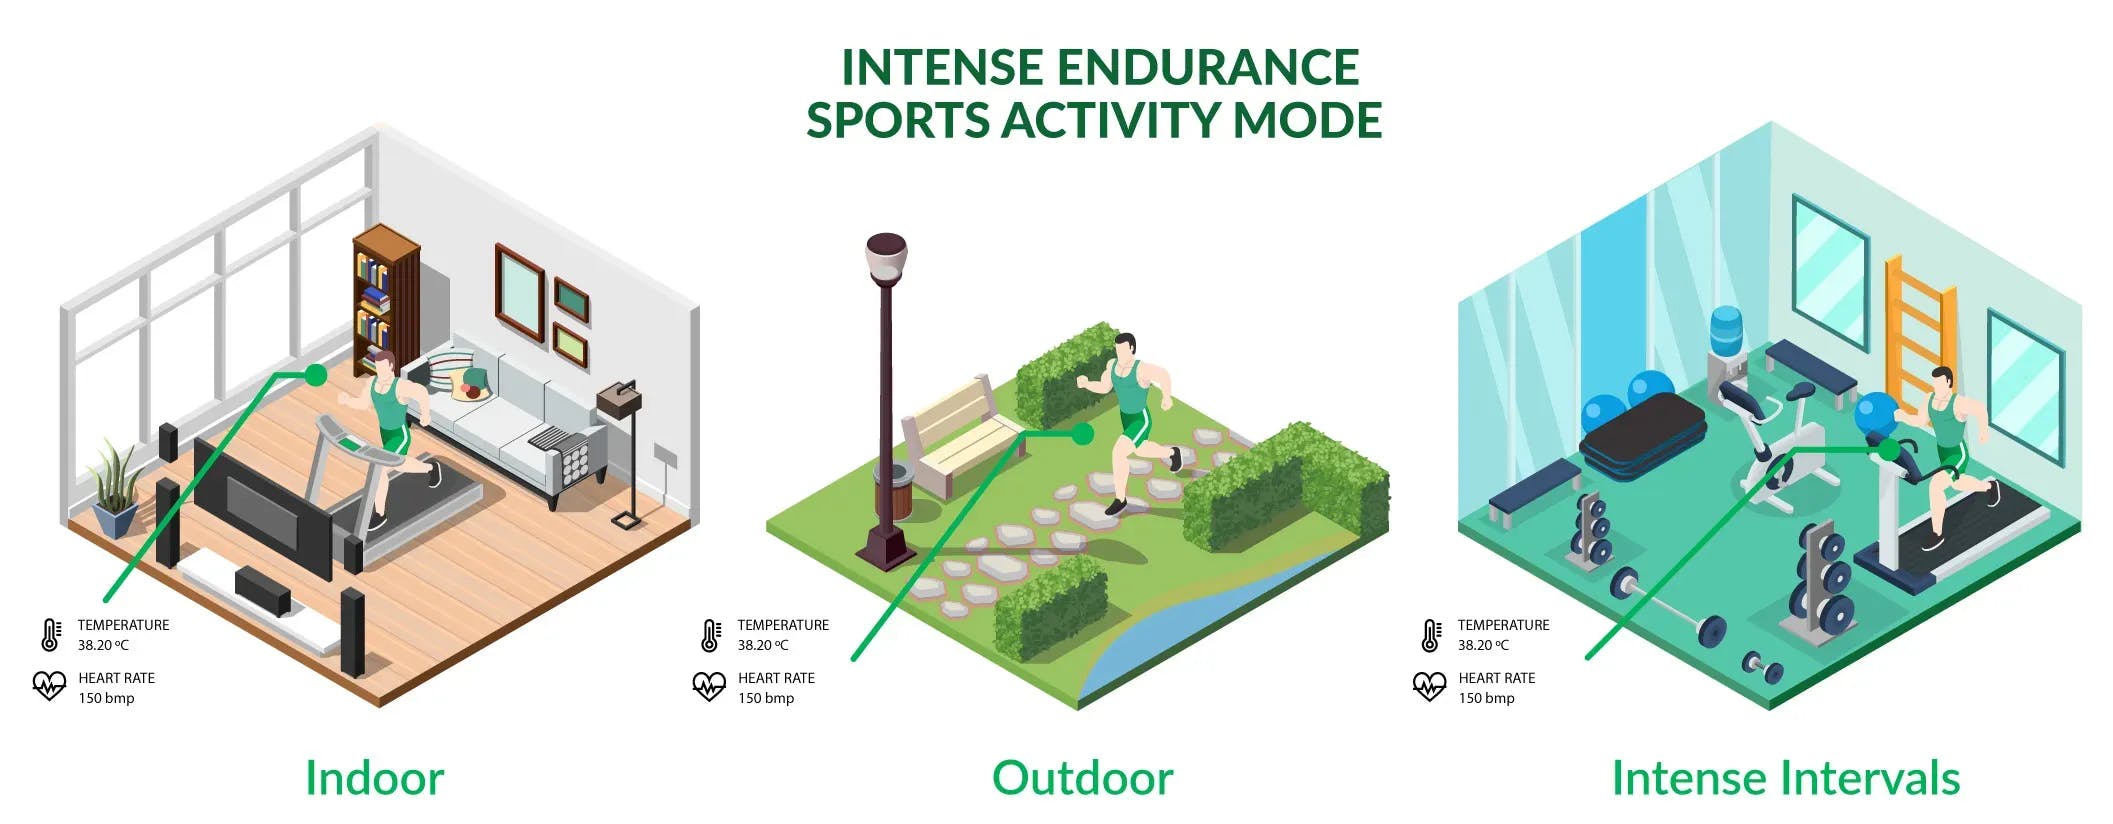 Validated Use Cases: Intense Endurance Sports Activity Mode (Indoor, Outdoor, Intense Intervals)